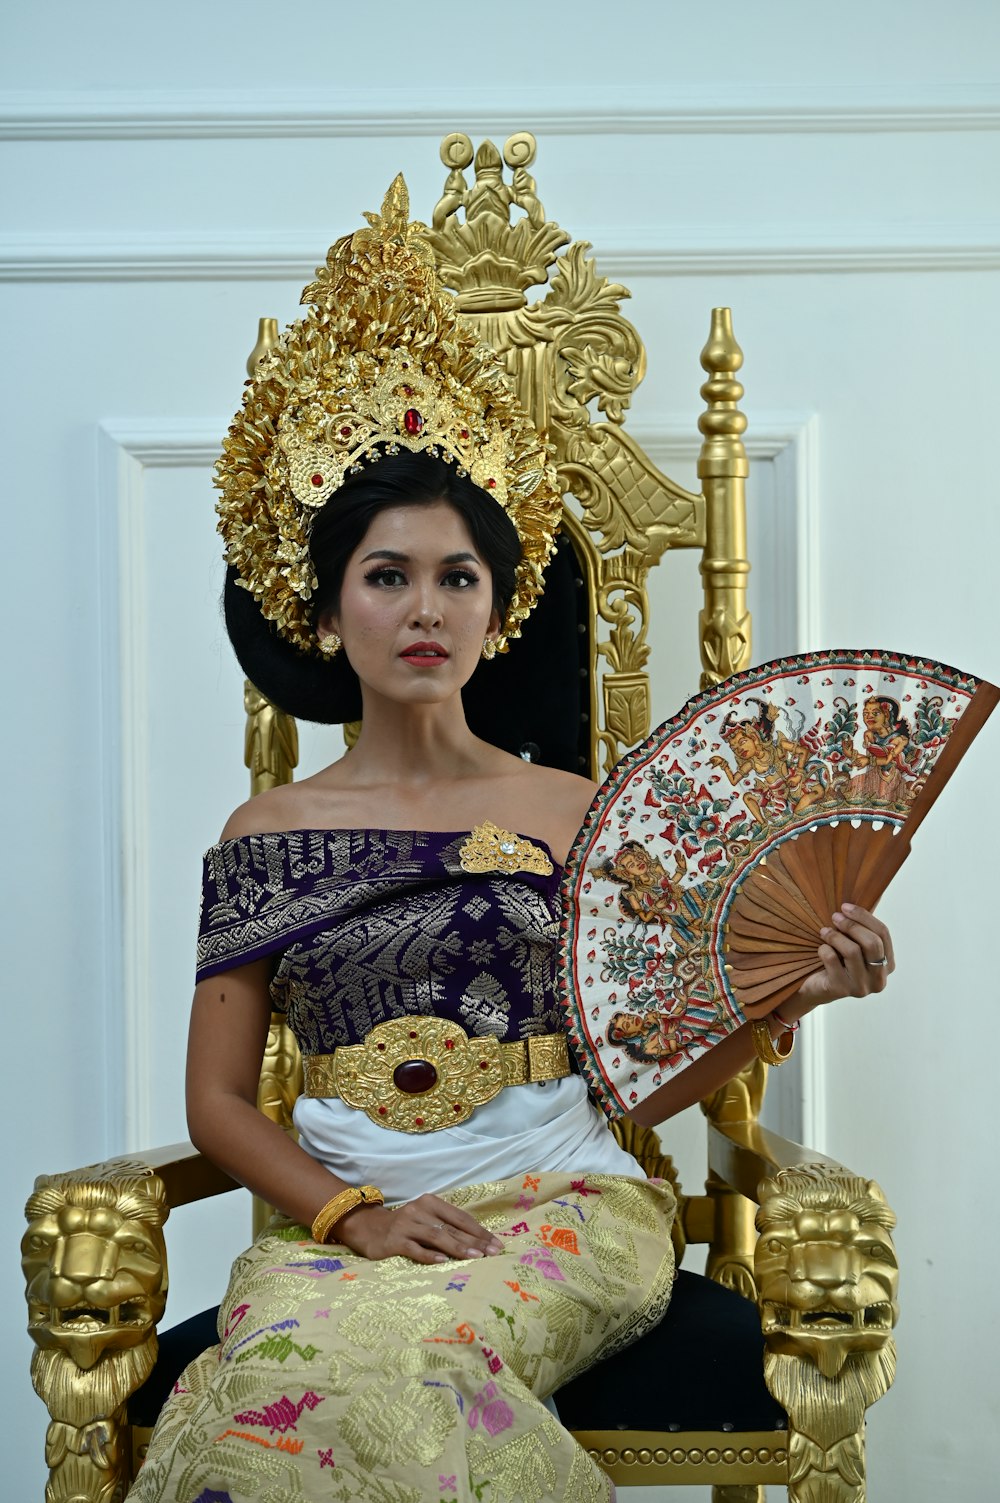 a woman sitting on a golden throne holding a fan